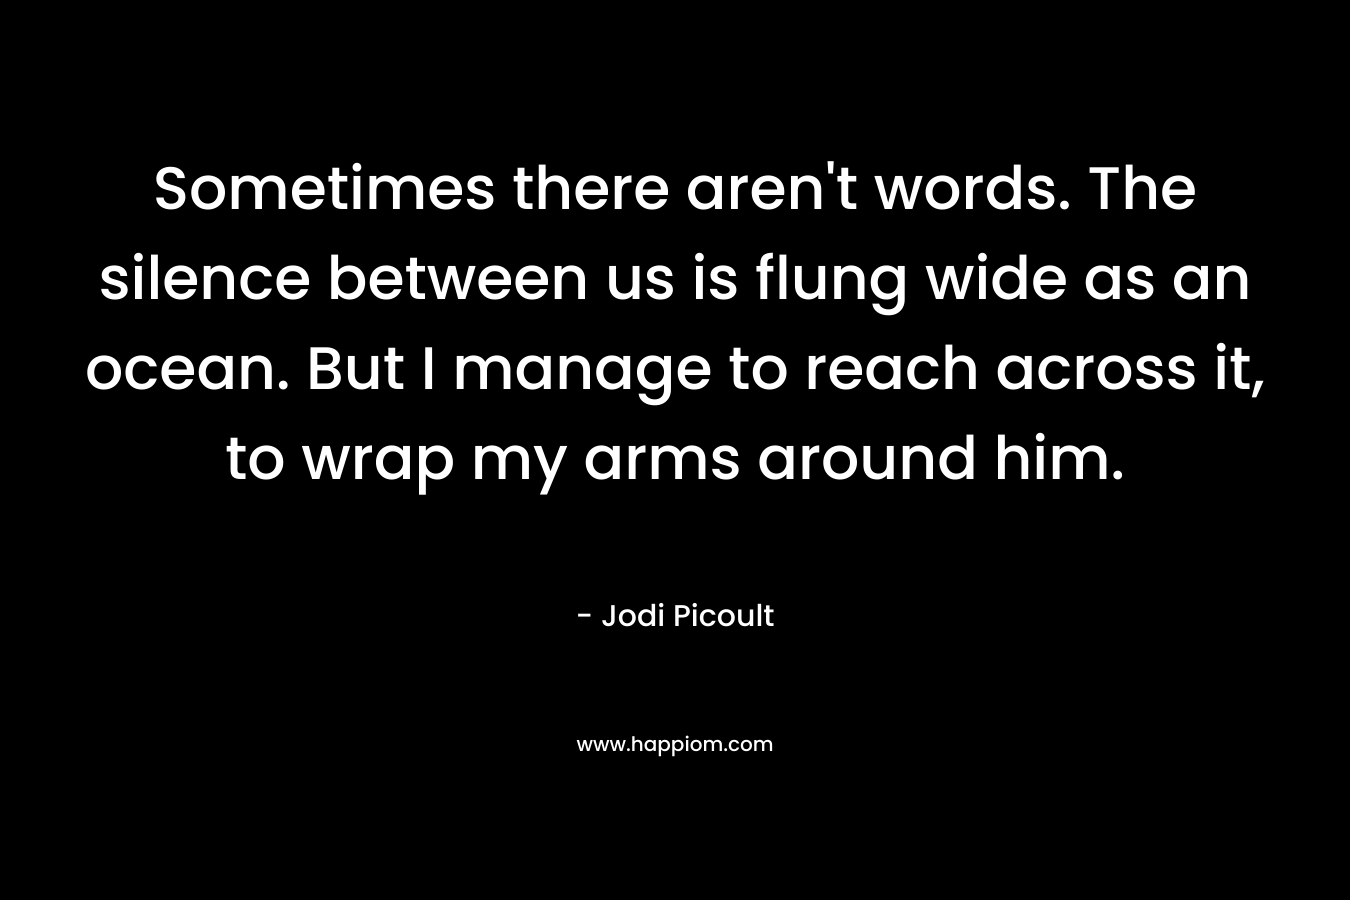 Sometimes there aren’t words. The silence between us is flung wide as an ocean. But I manage to reach across it, to wrap my arms around him. – Jodi Picoult